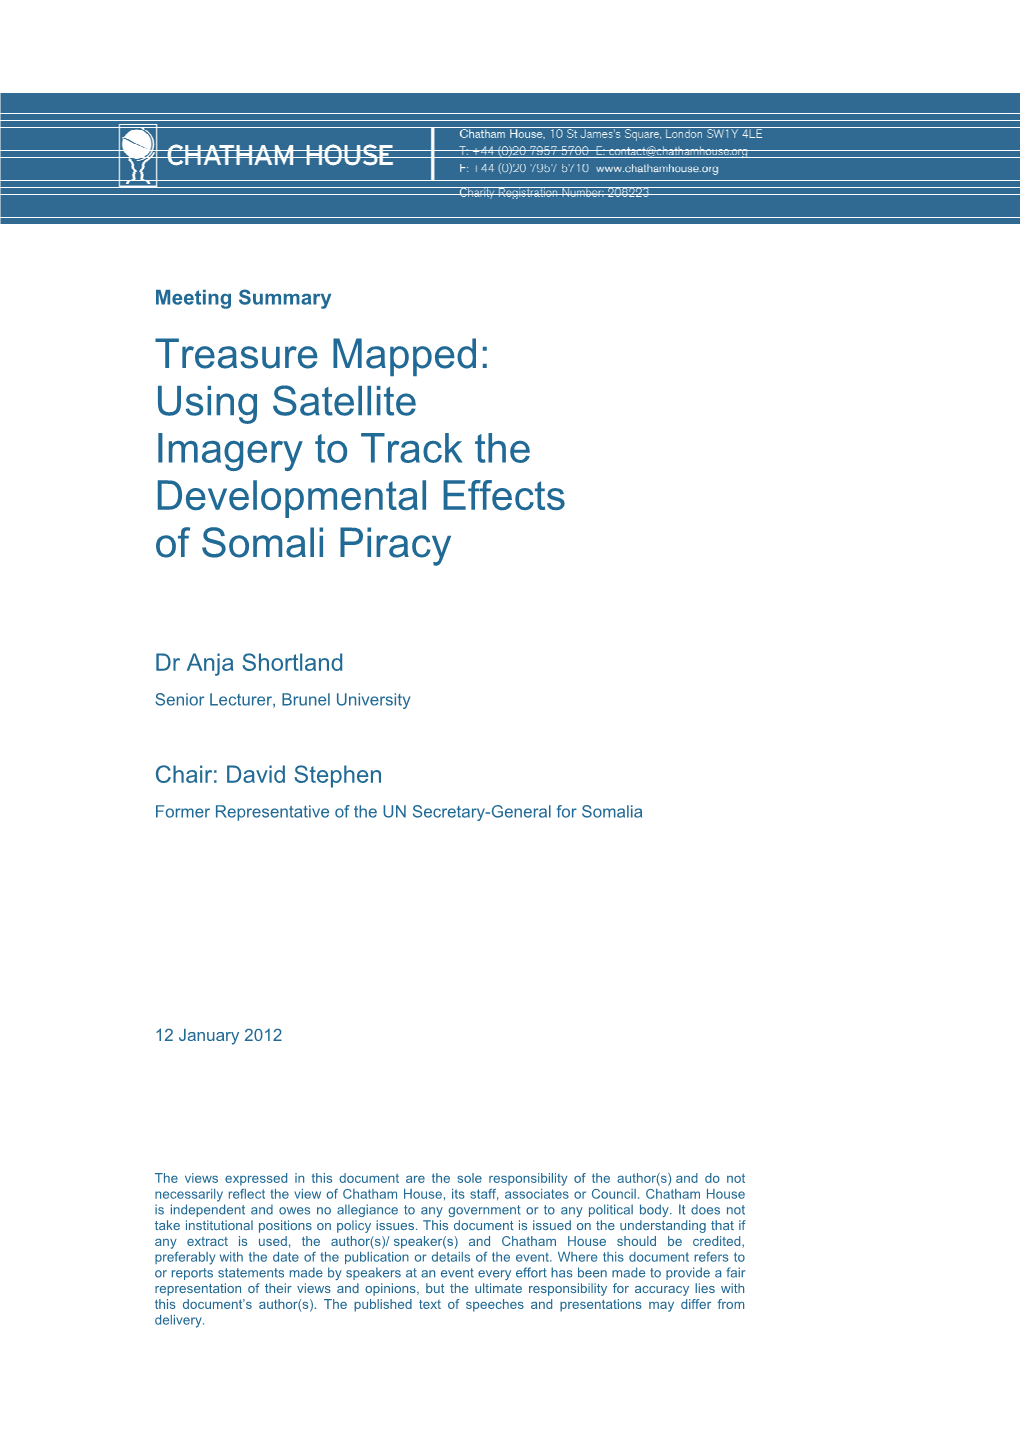 Treasure Mapped: Using Satellite Imagery to Track the Developmental Effects of Somali Piracy